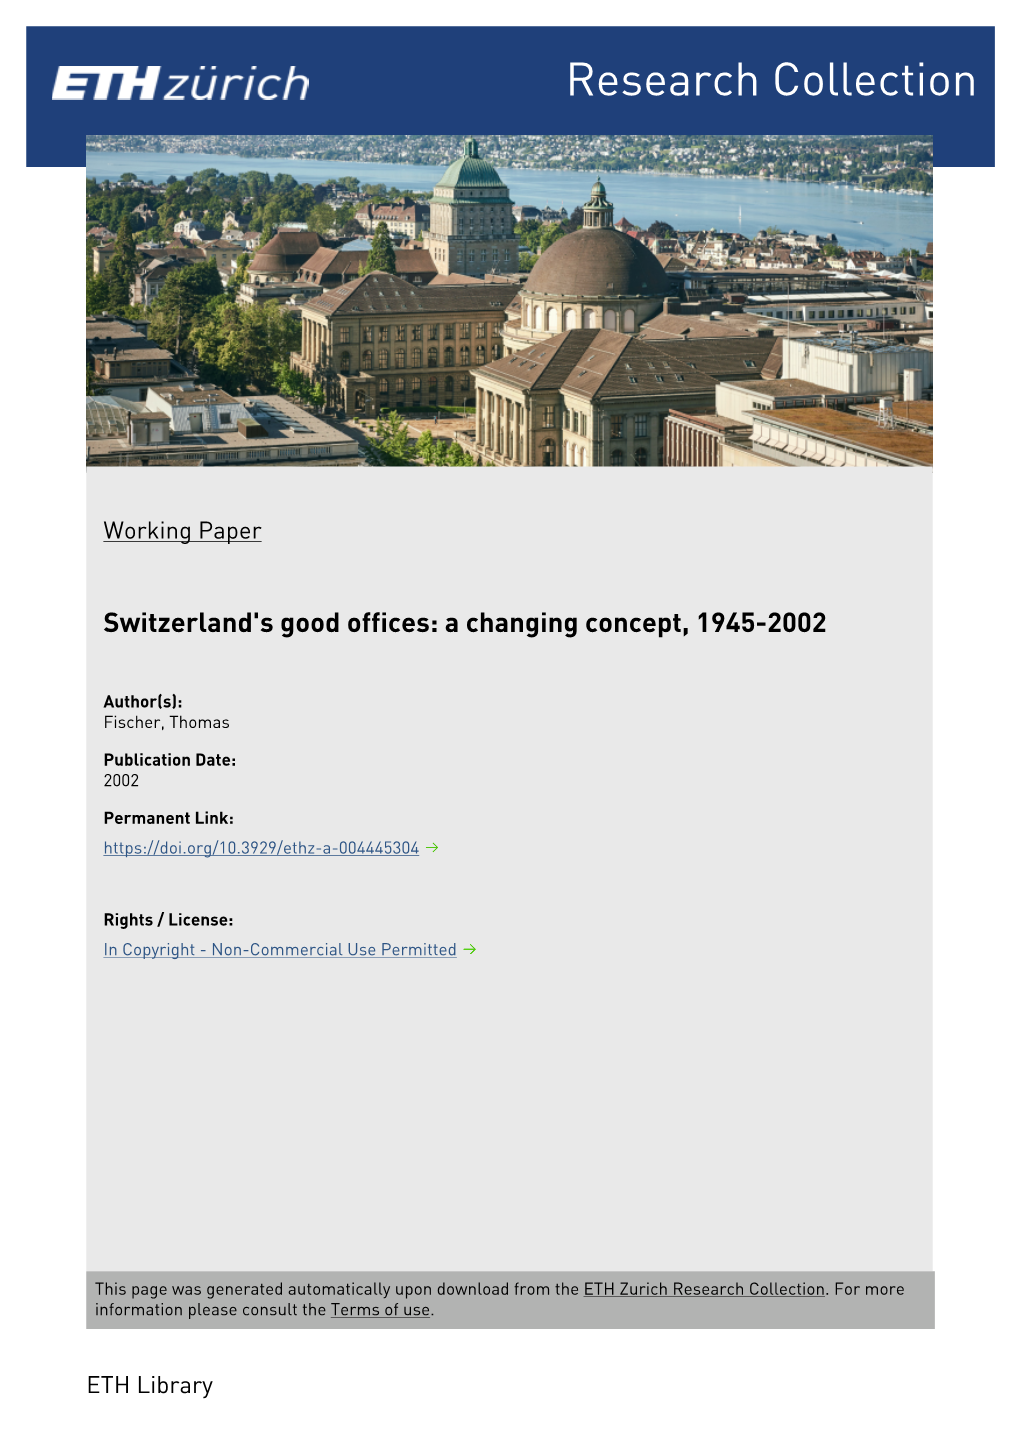 Switzerland's Good Offices: a Changing Concept, 1945-2002